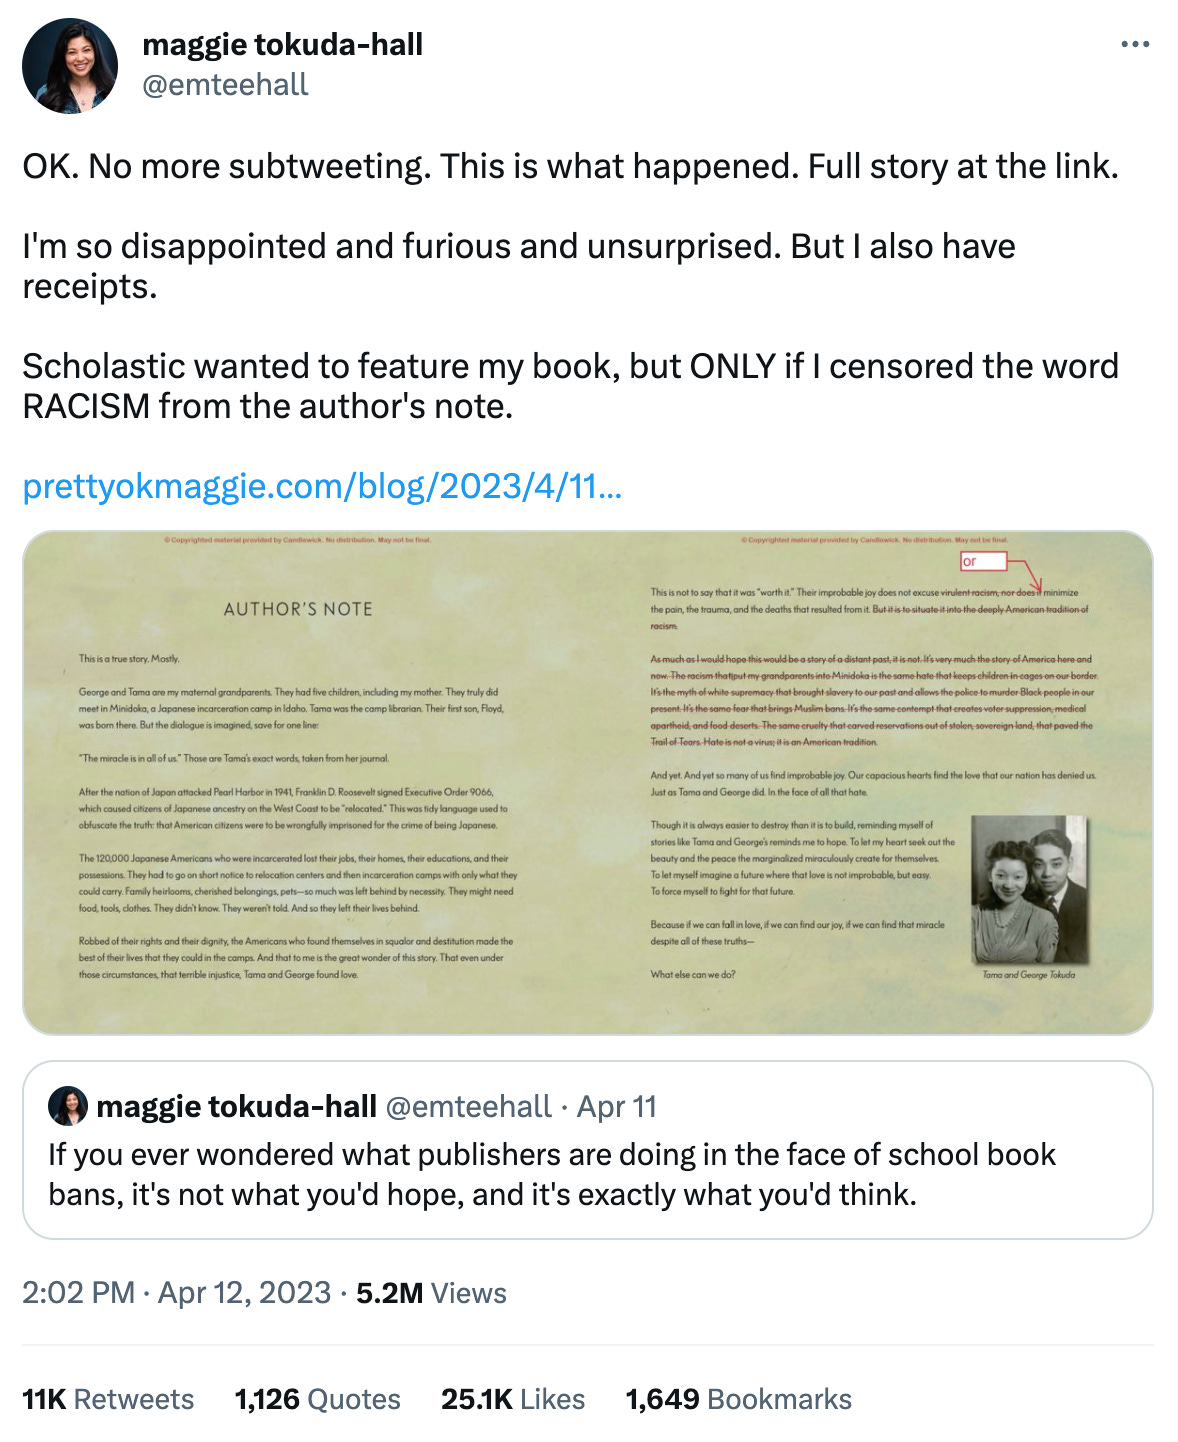 A screenshot of a tweet from Maggie Tokuda-Hall detailing racism from Scholastic